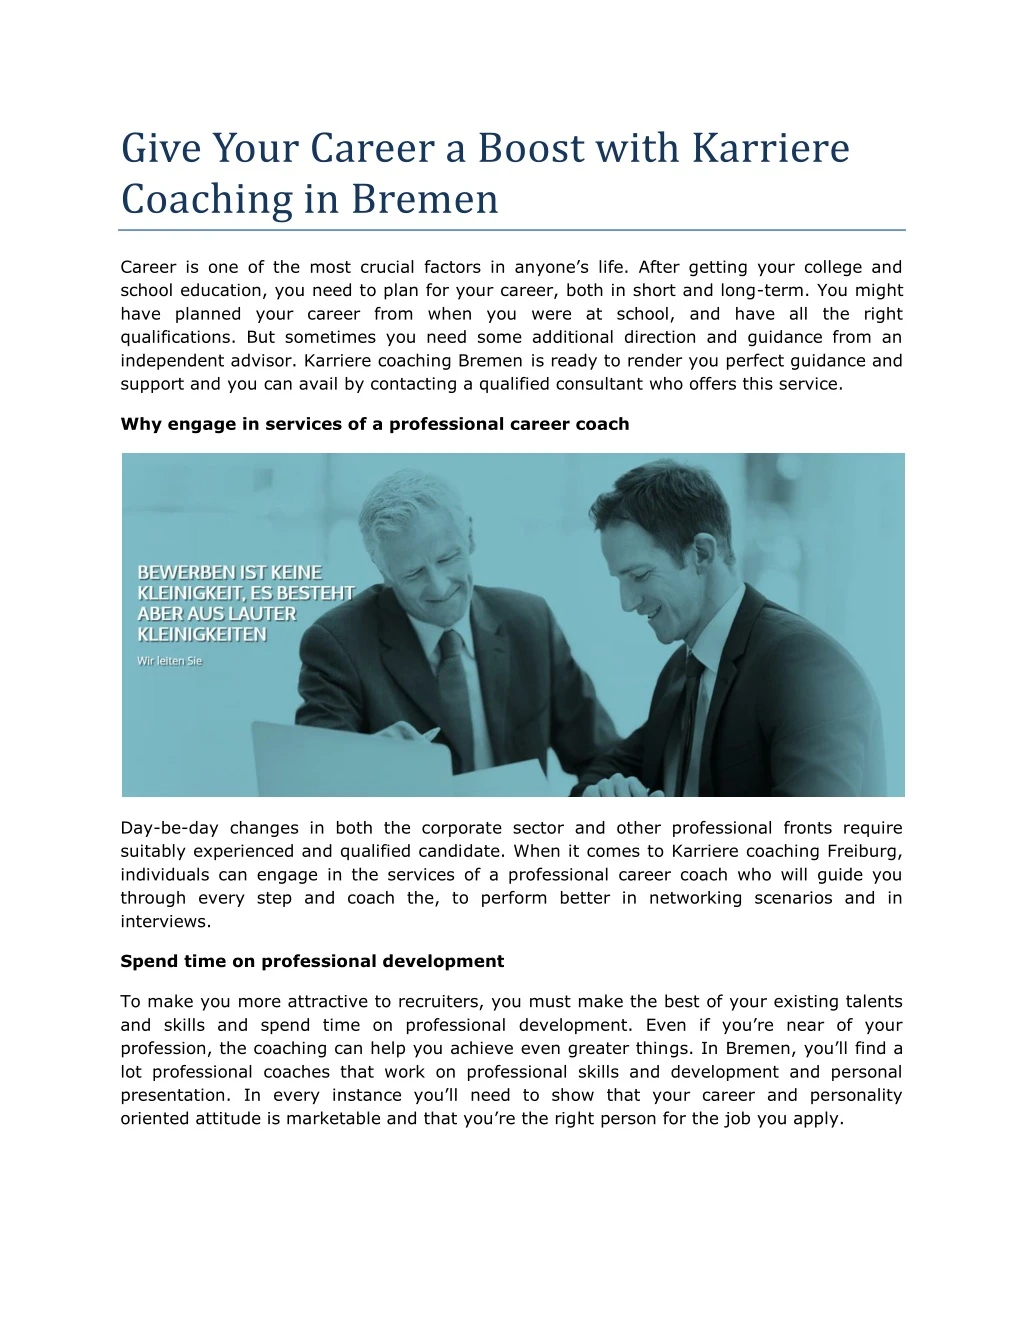 give your career a boost with karriere coaching